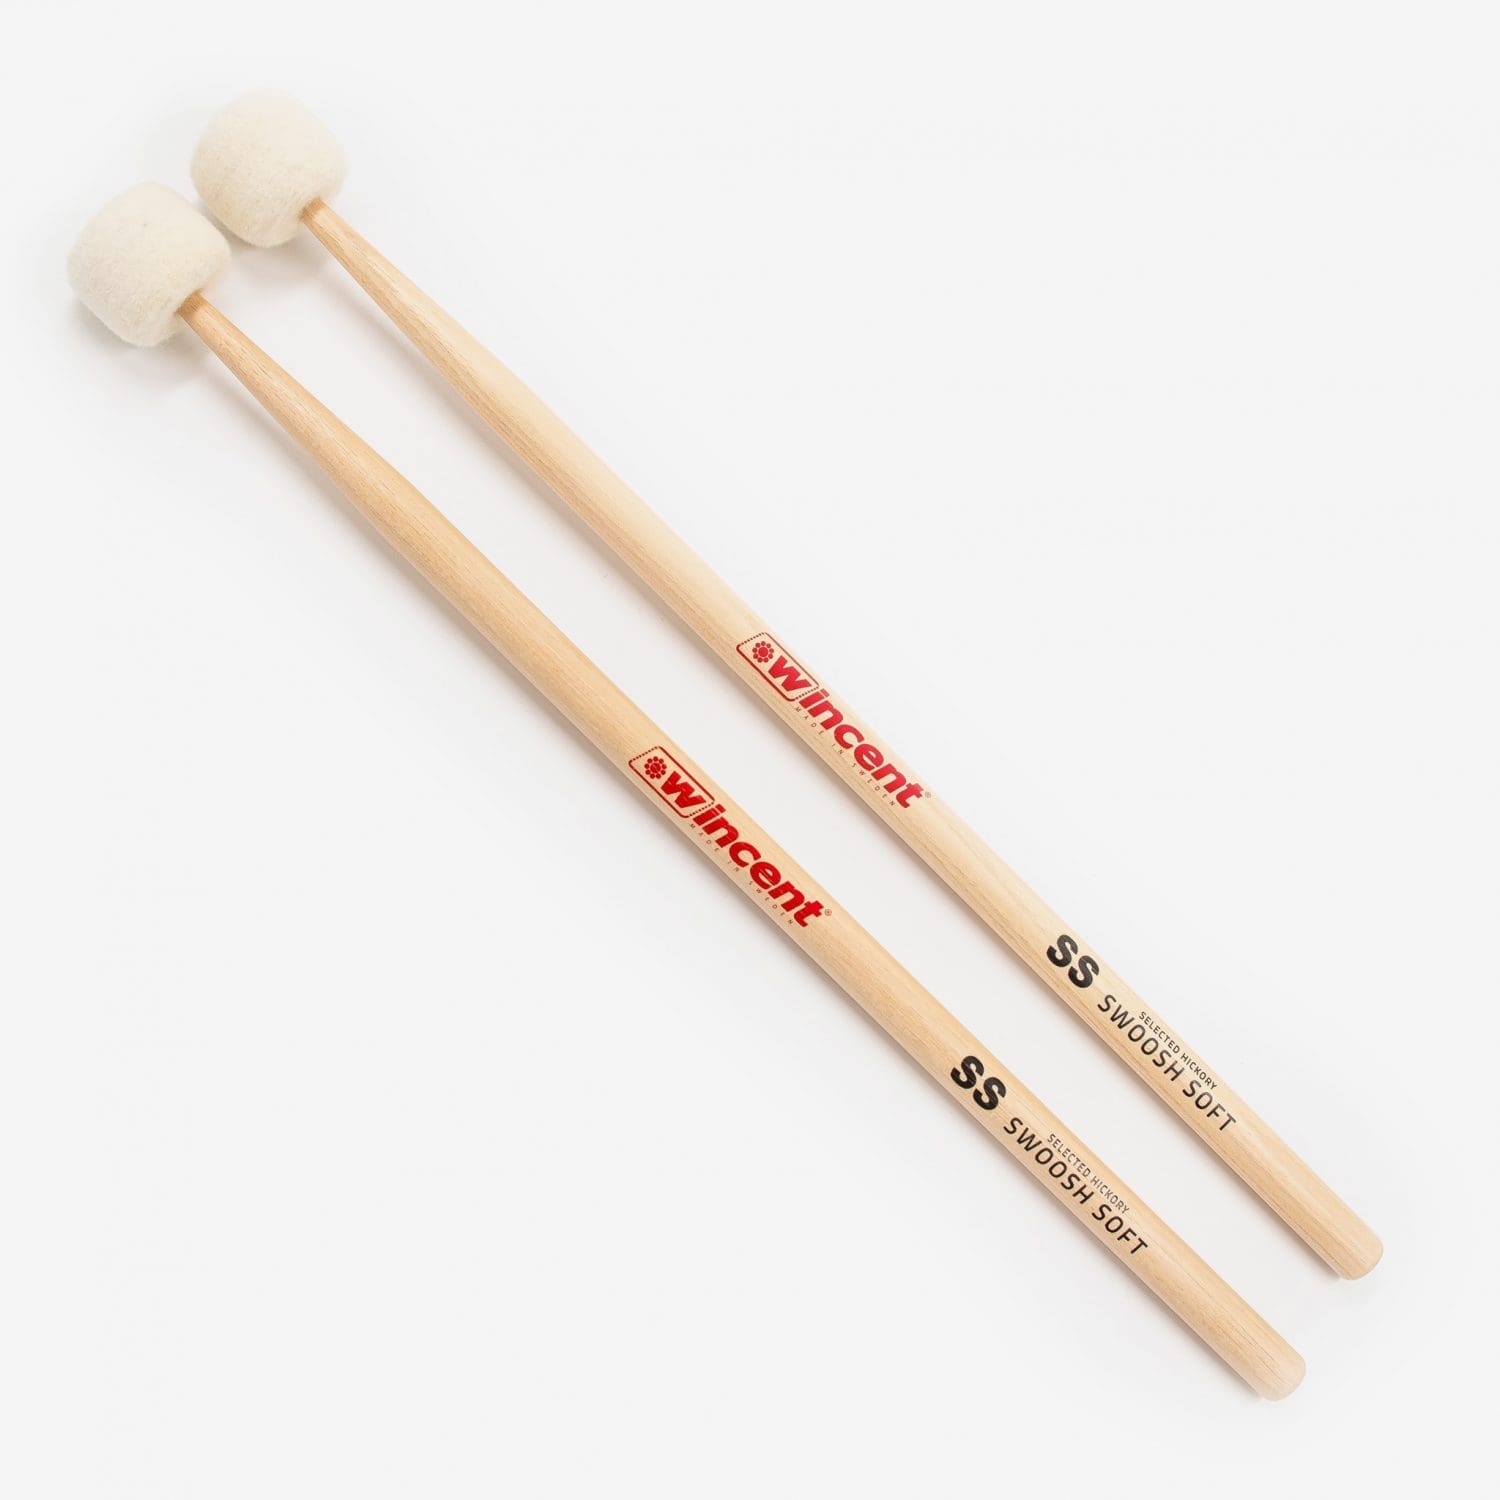 Swoosh Soft Cymbal Mallet Pair